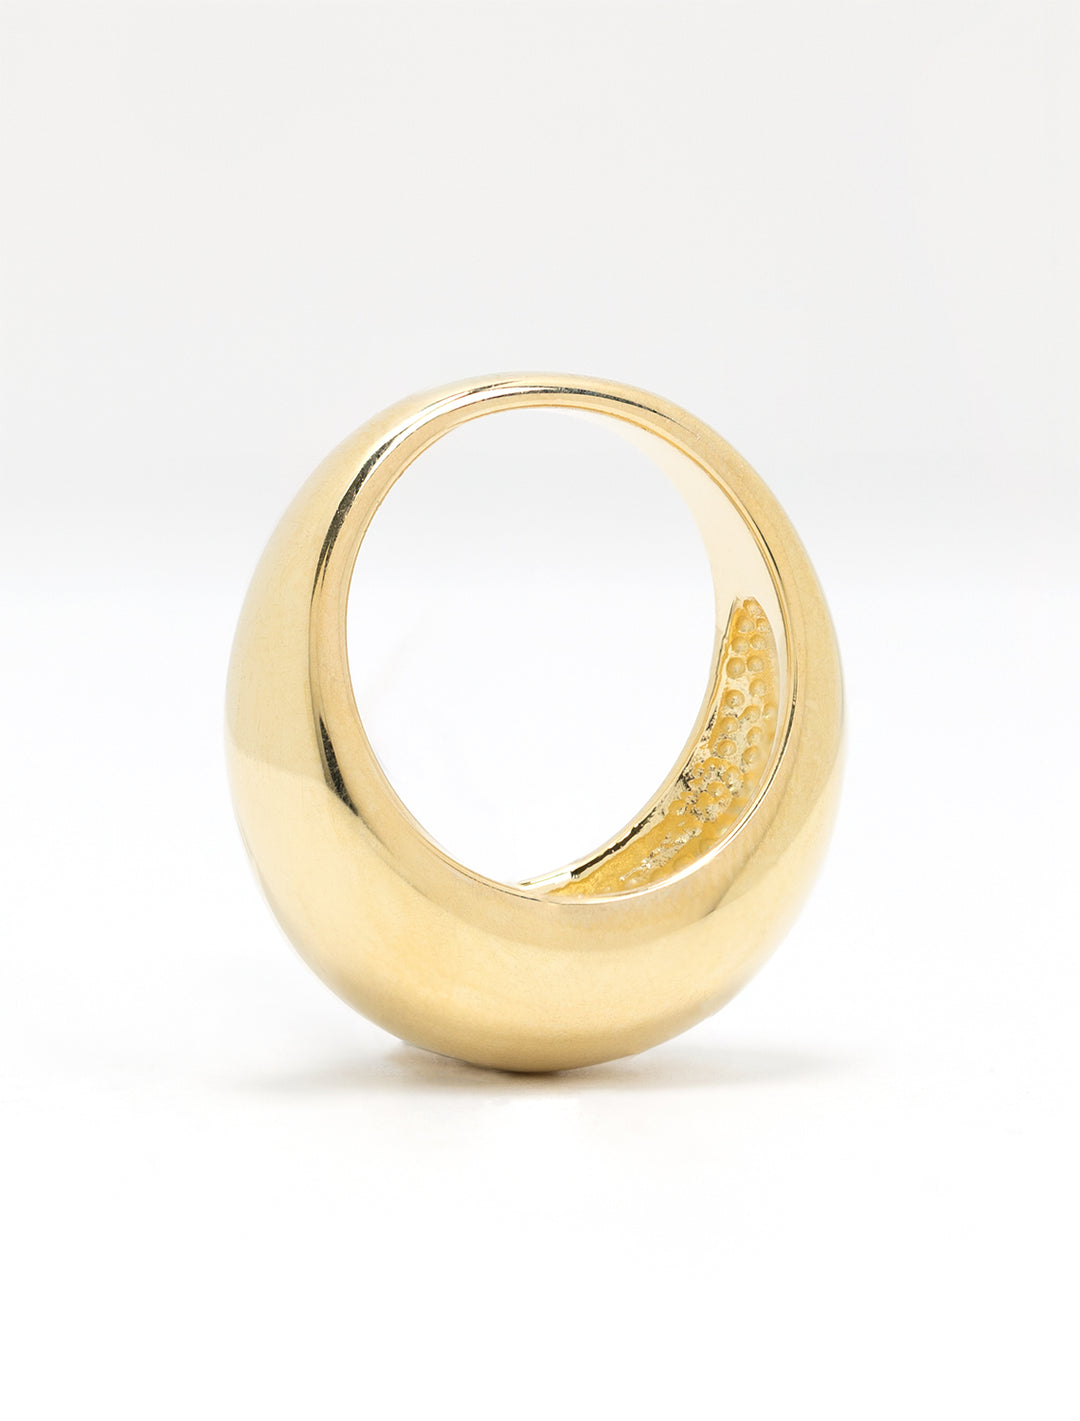 paloma ring in gold (2)